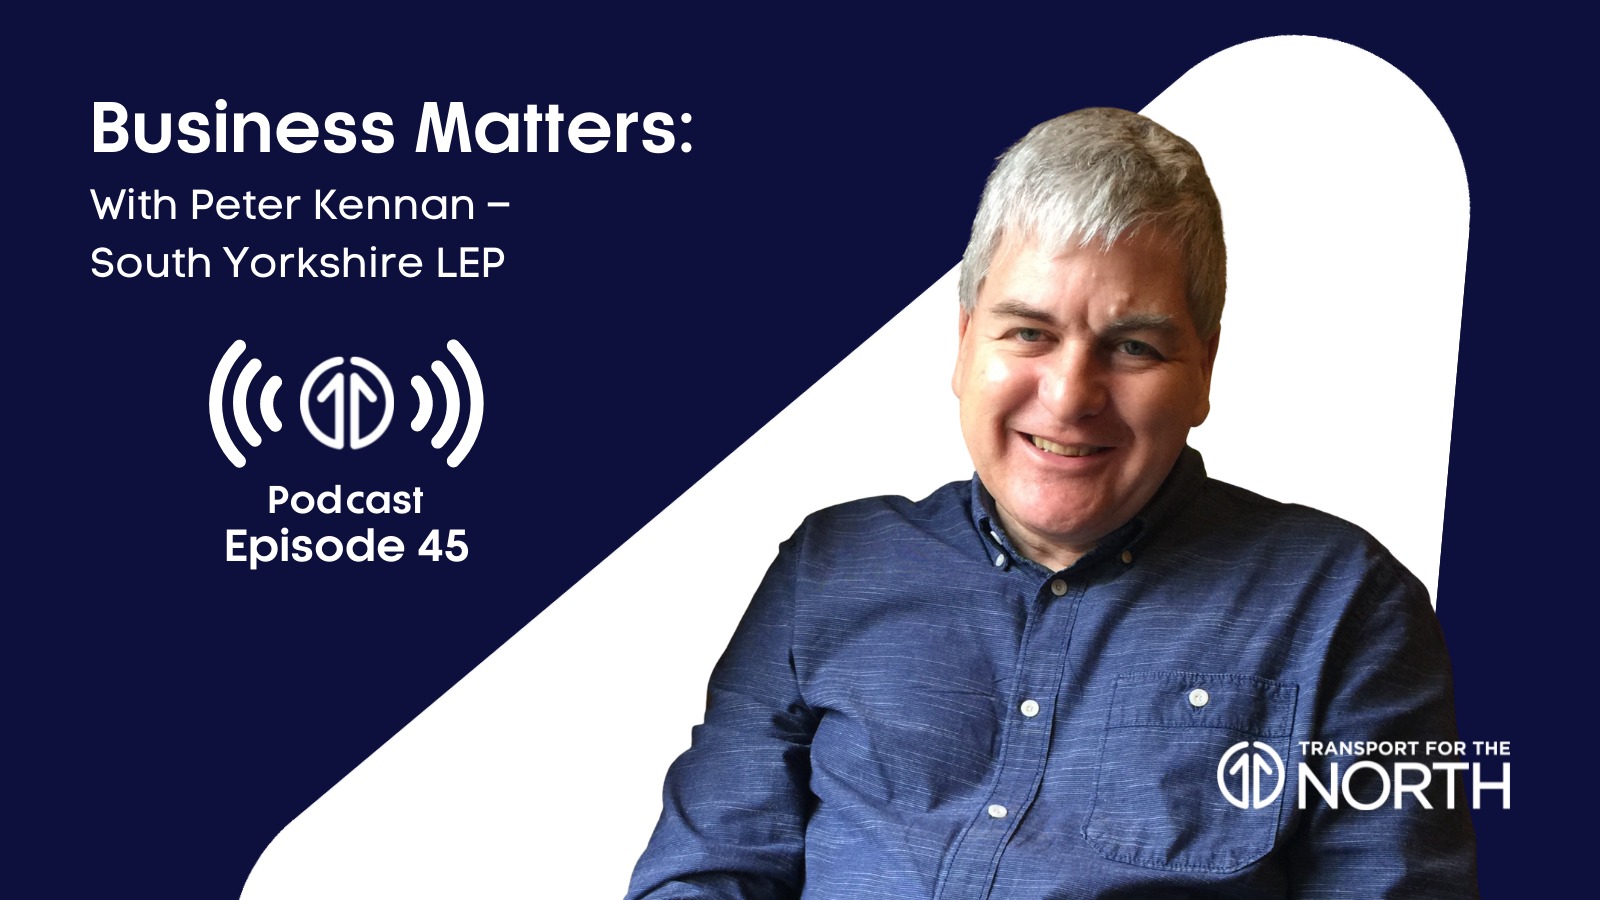 Podcast with Peter Kennan, TfN Board Member for South Yorkshire Local Enterprise Partnership (LEP) and Private Sector Co-Chair of the Transport & Environment Board at South Yorkshire Mayoral Combined Authority.